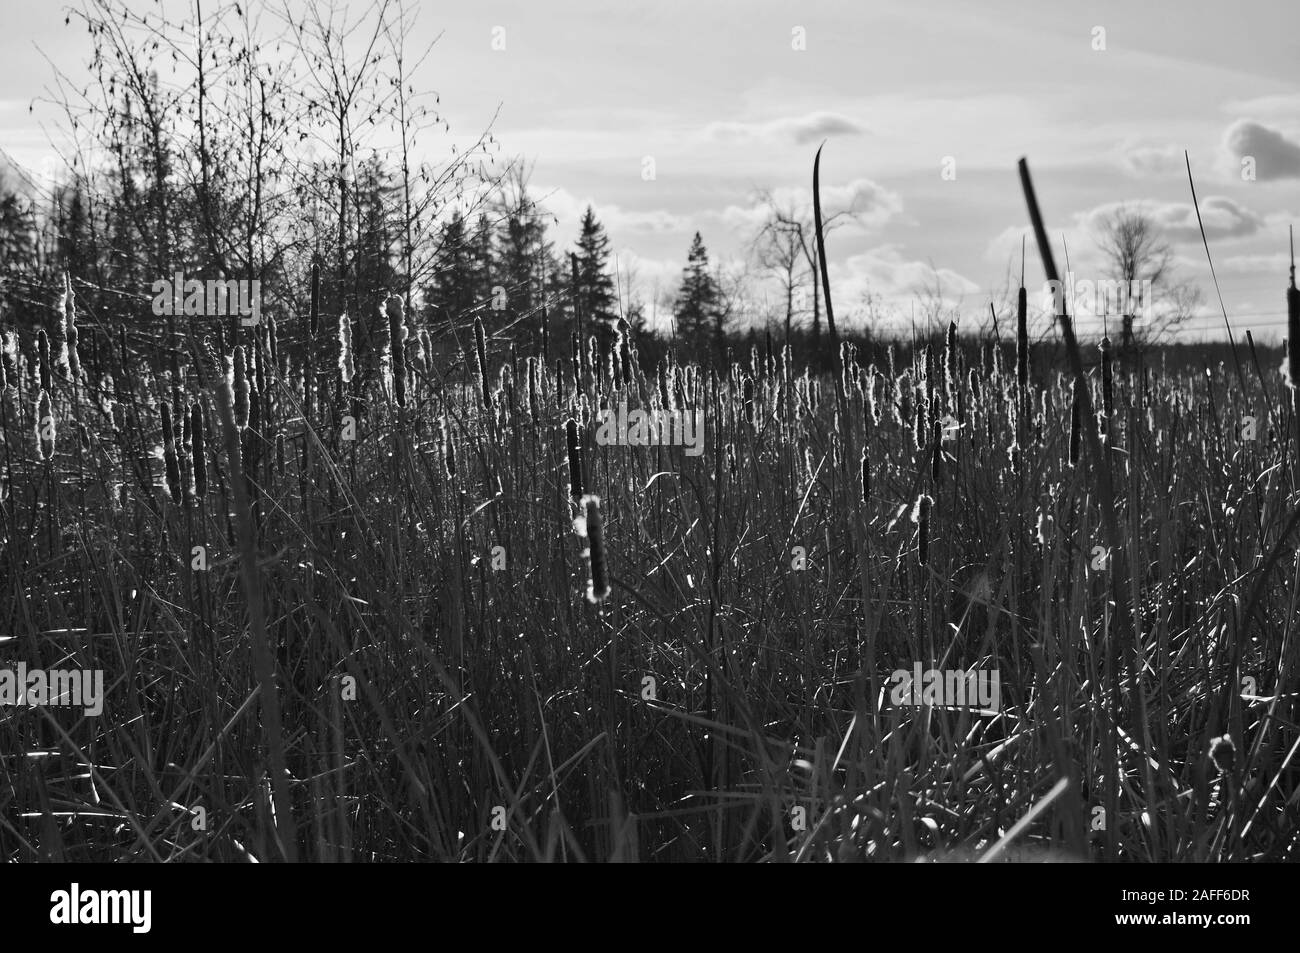 Black and white shot of tall grasses (bulrush) glowing in the late afternoon winter sun, Stony Swamp wetlands, Ottawa, Ontario, Canada. Stock Photo